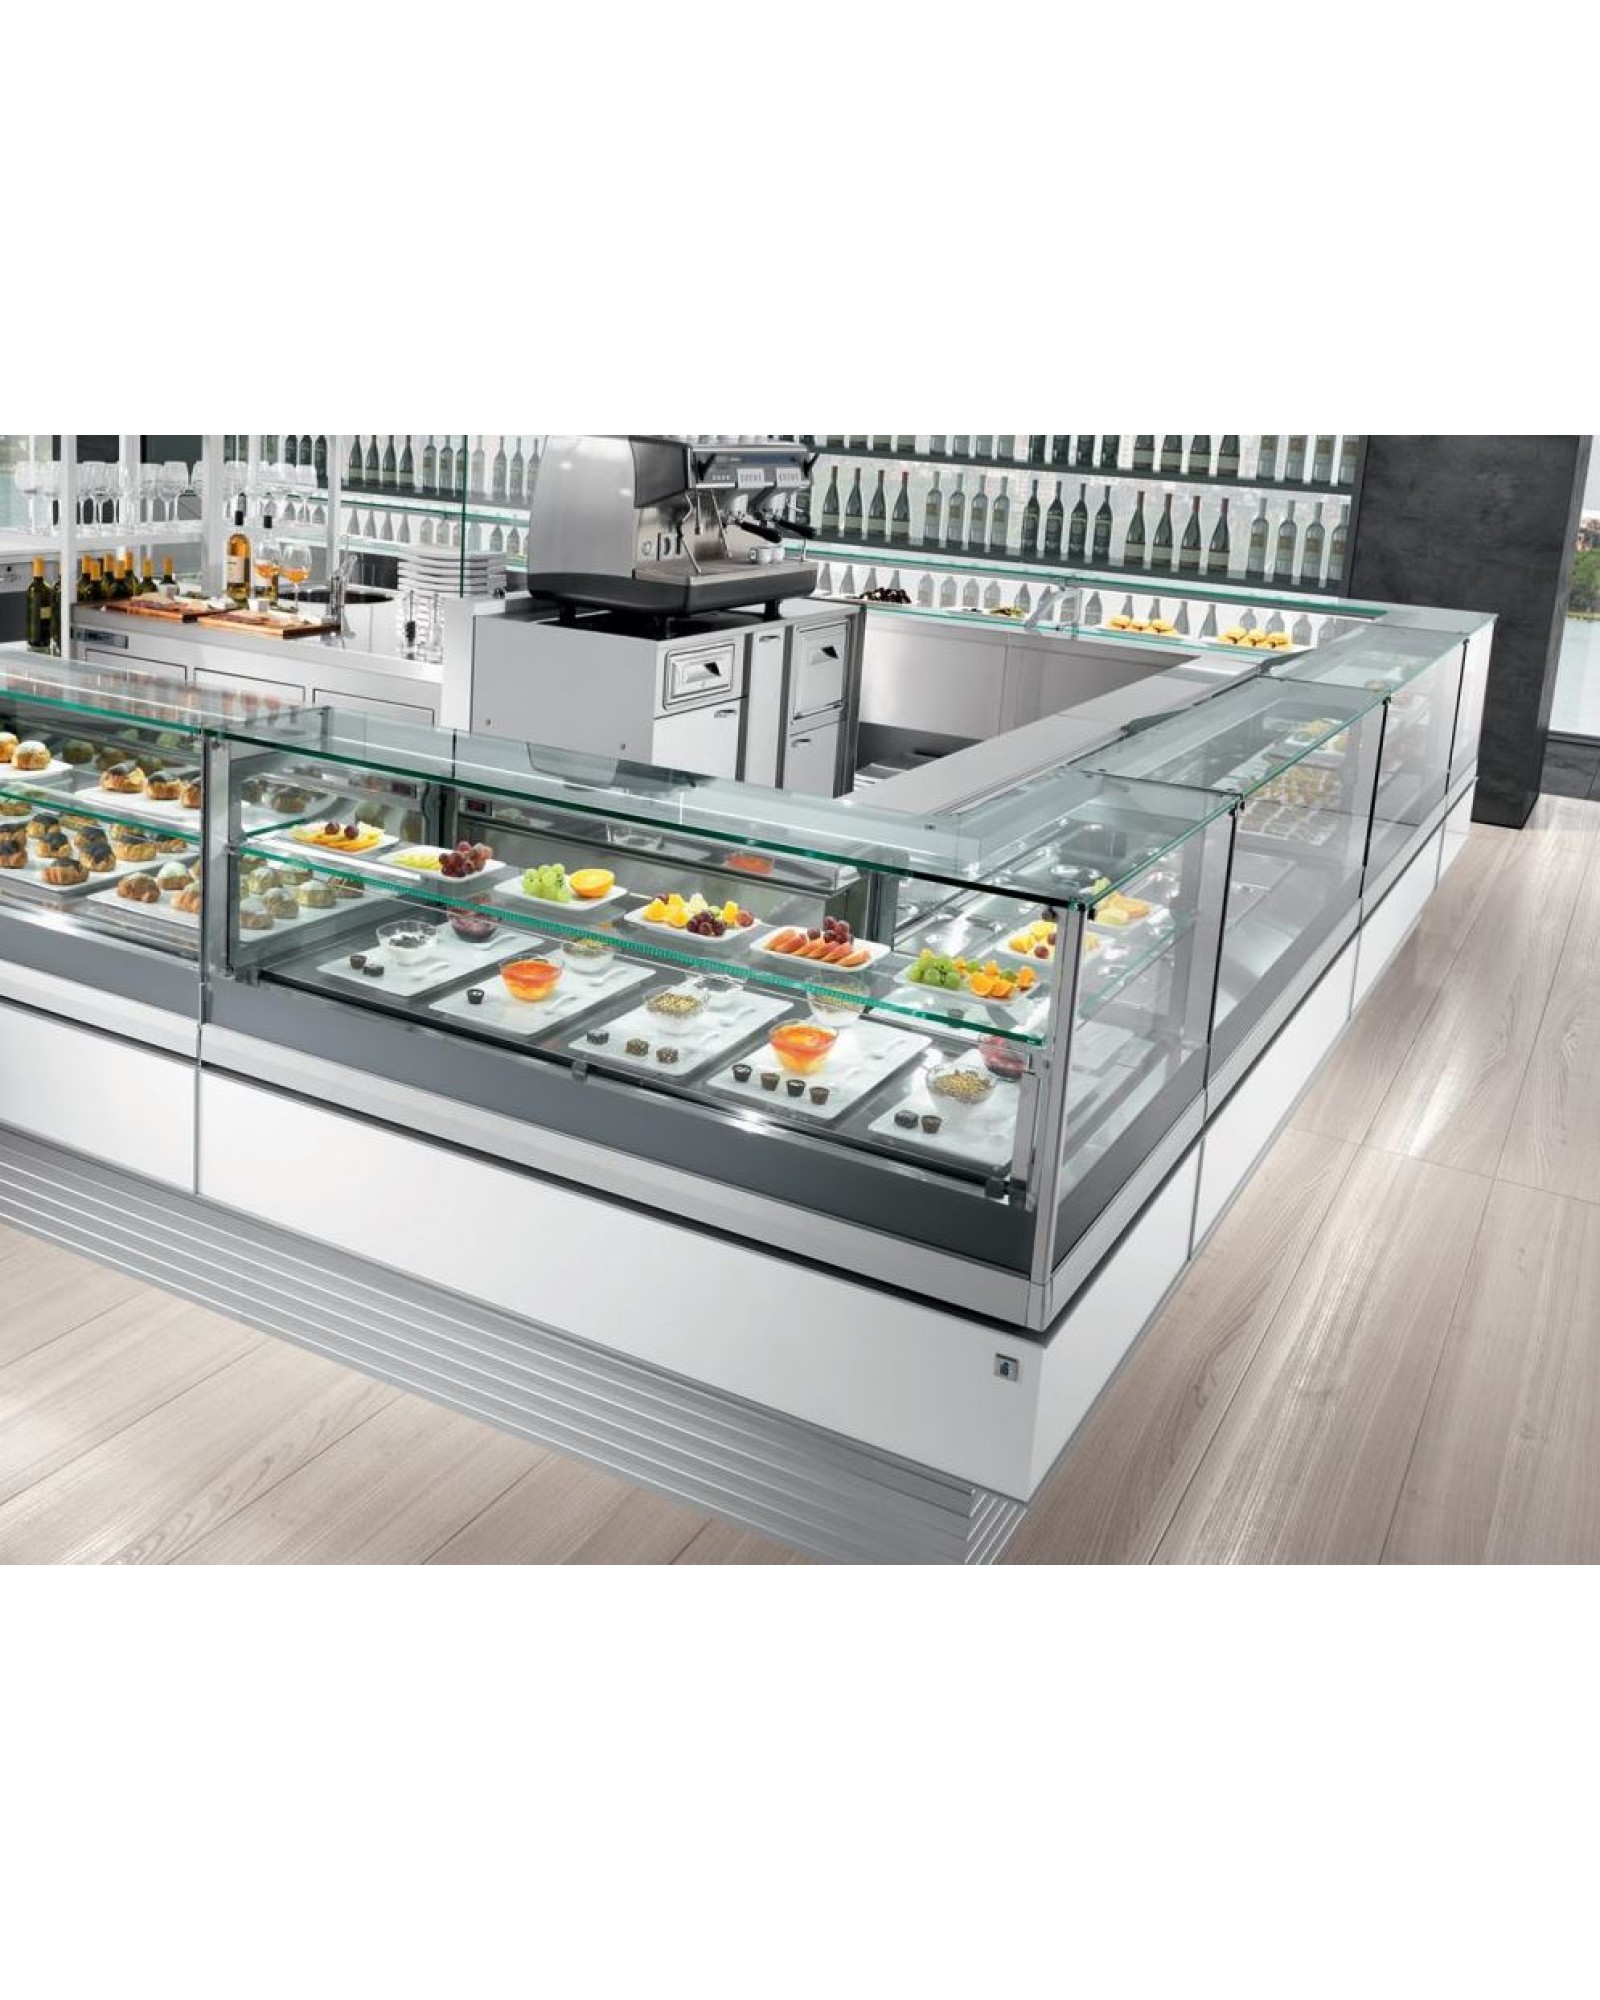 Bakery and Pastry Mixed Display Cases